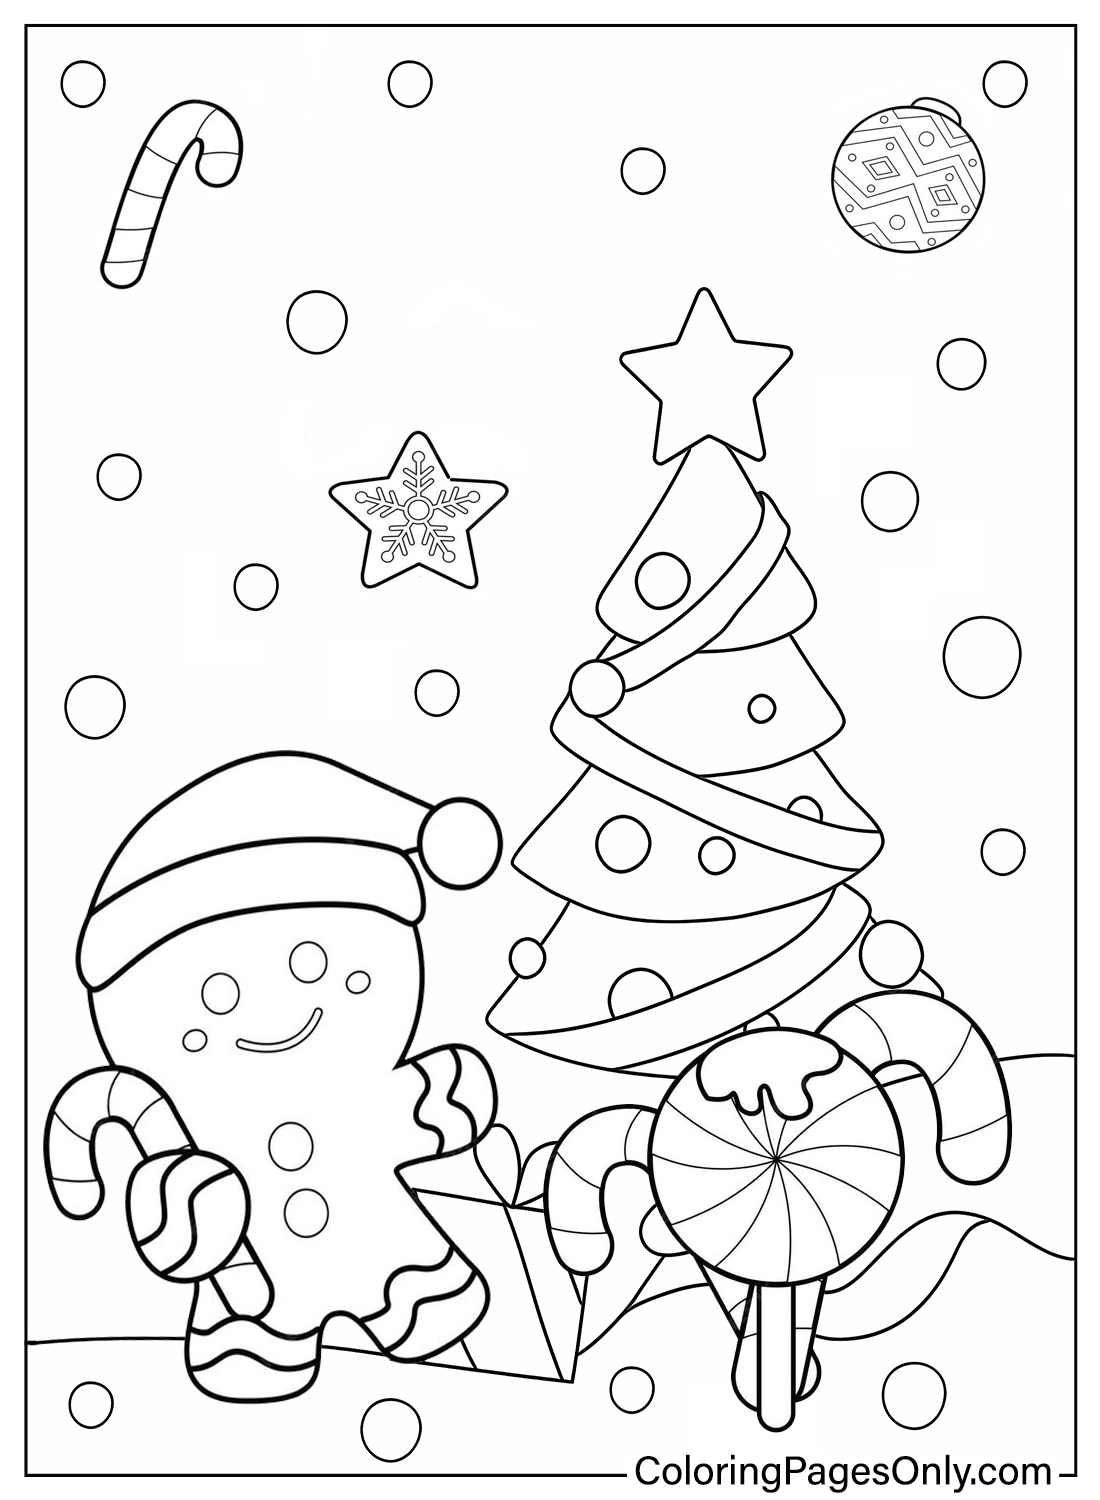 Gingerbread Man with Christmas Tree Coloring